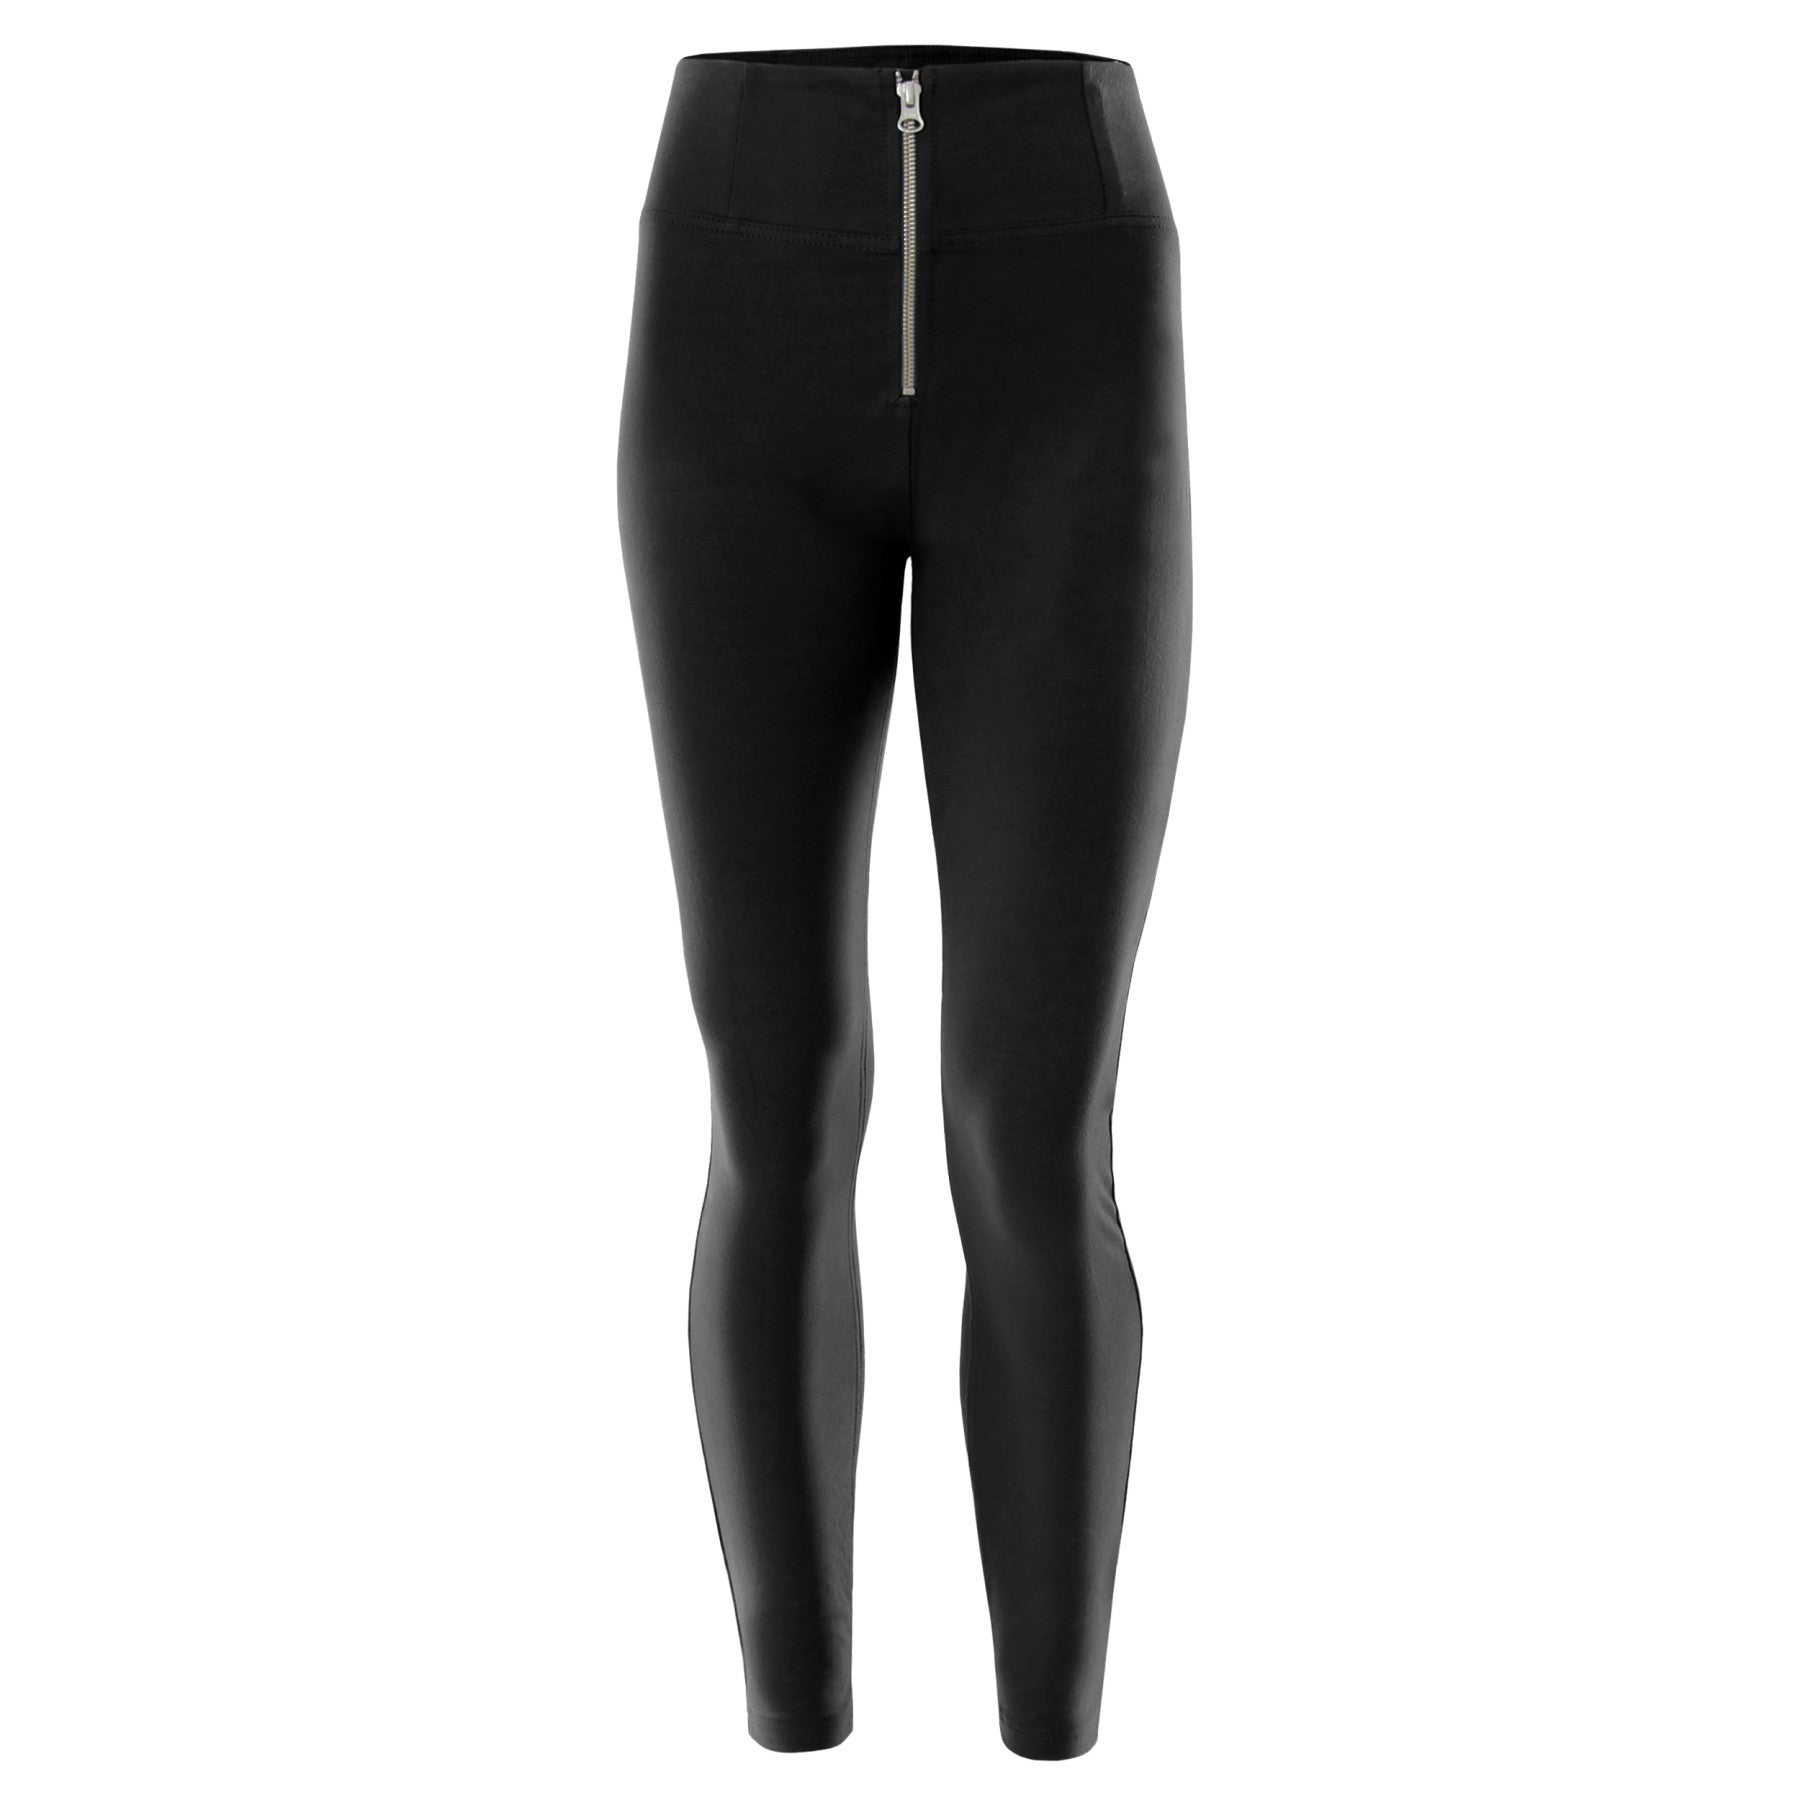 Freddy Black Pants In Stretch Cotton With High Waist And Skinny Fit